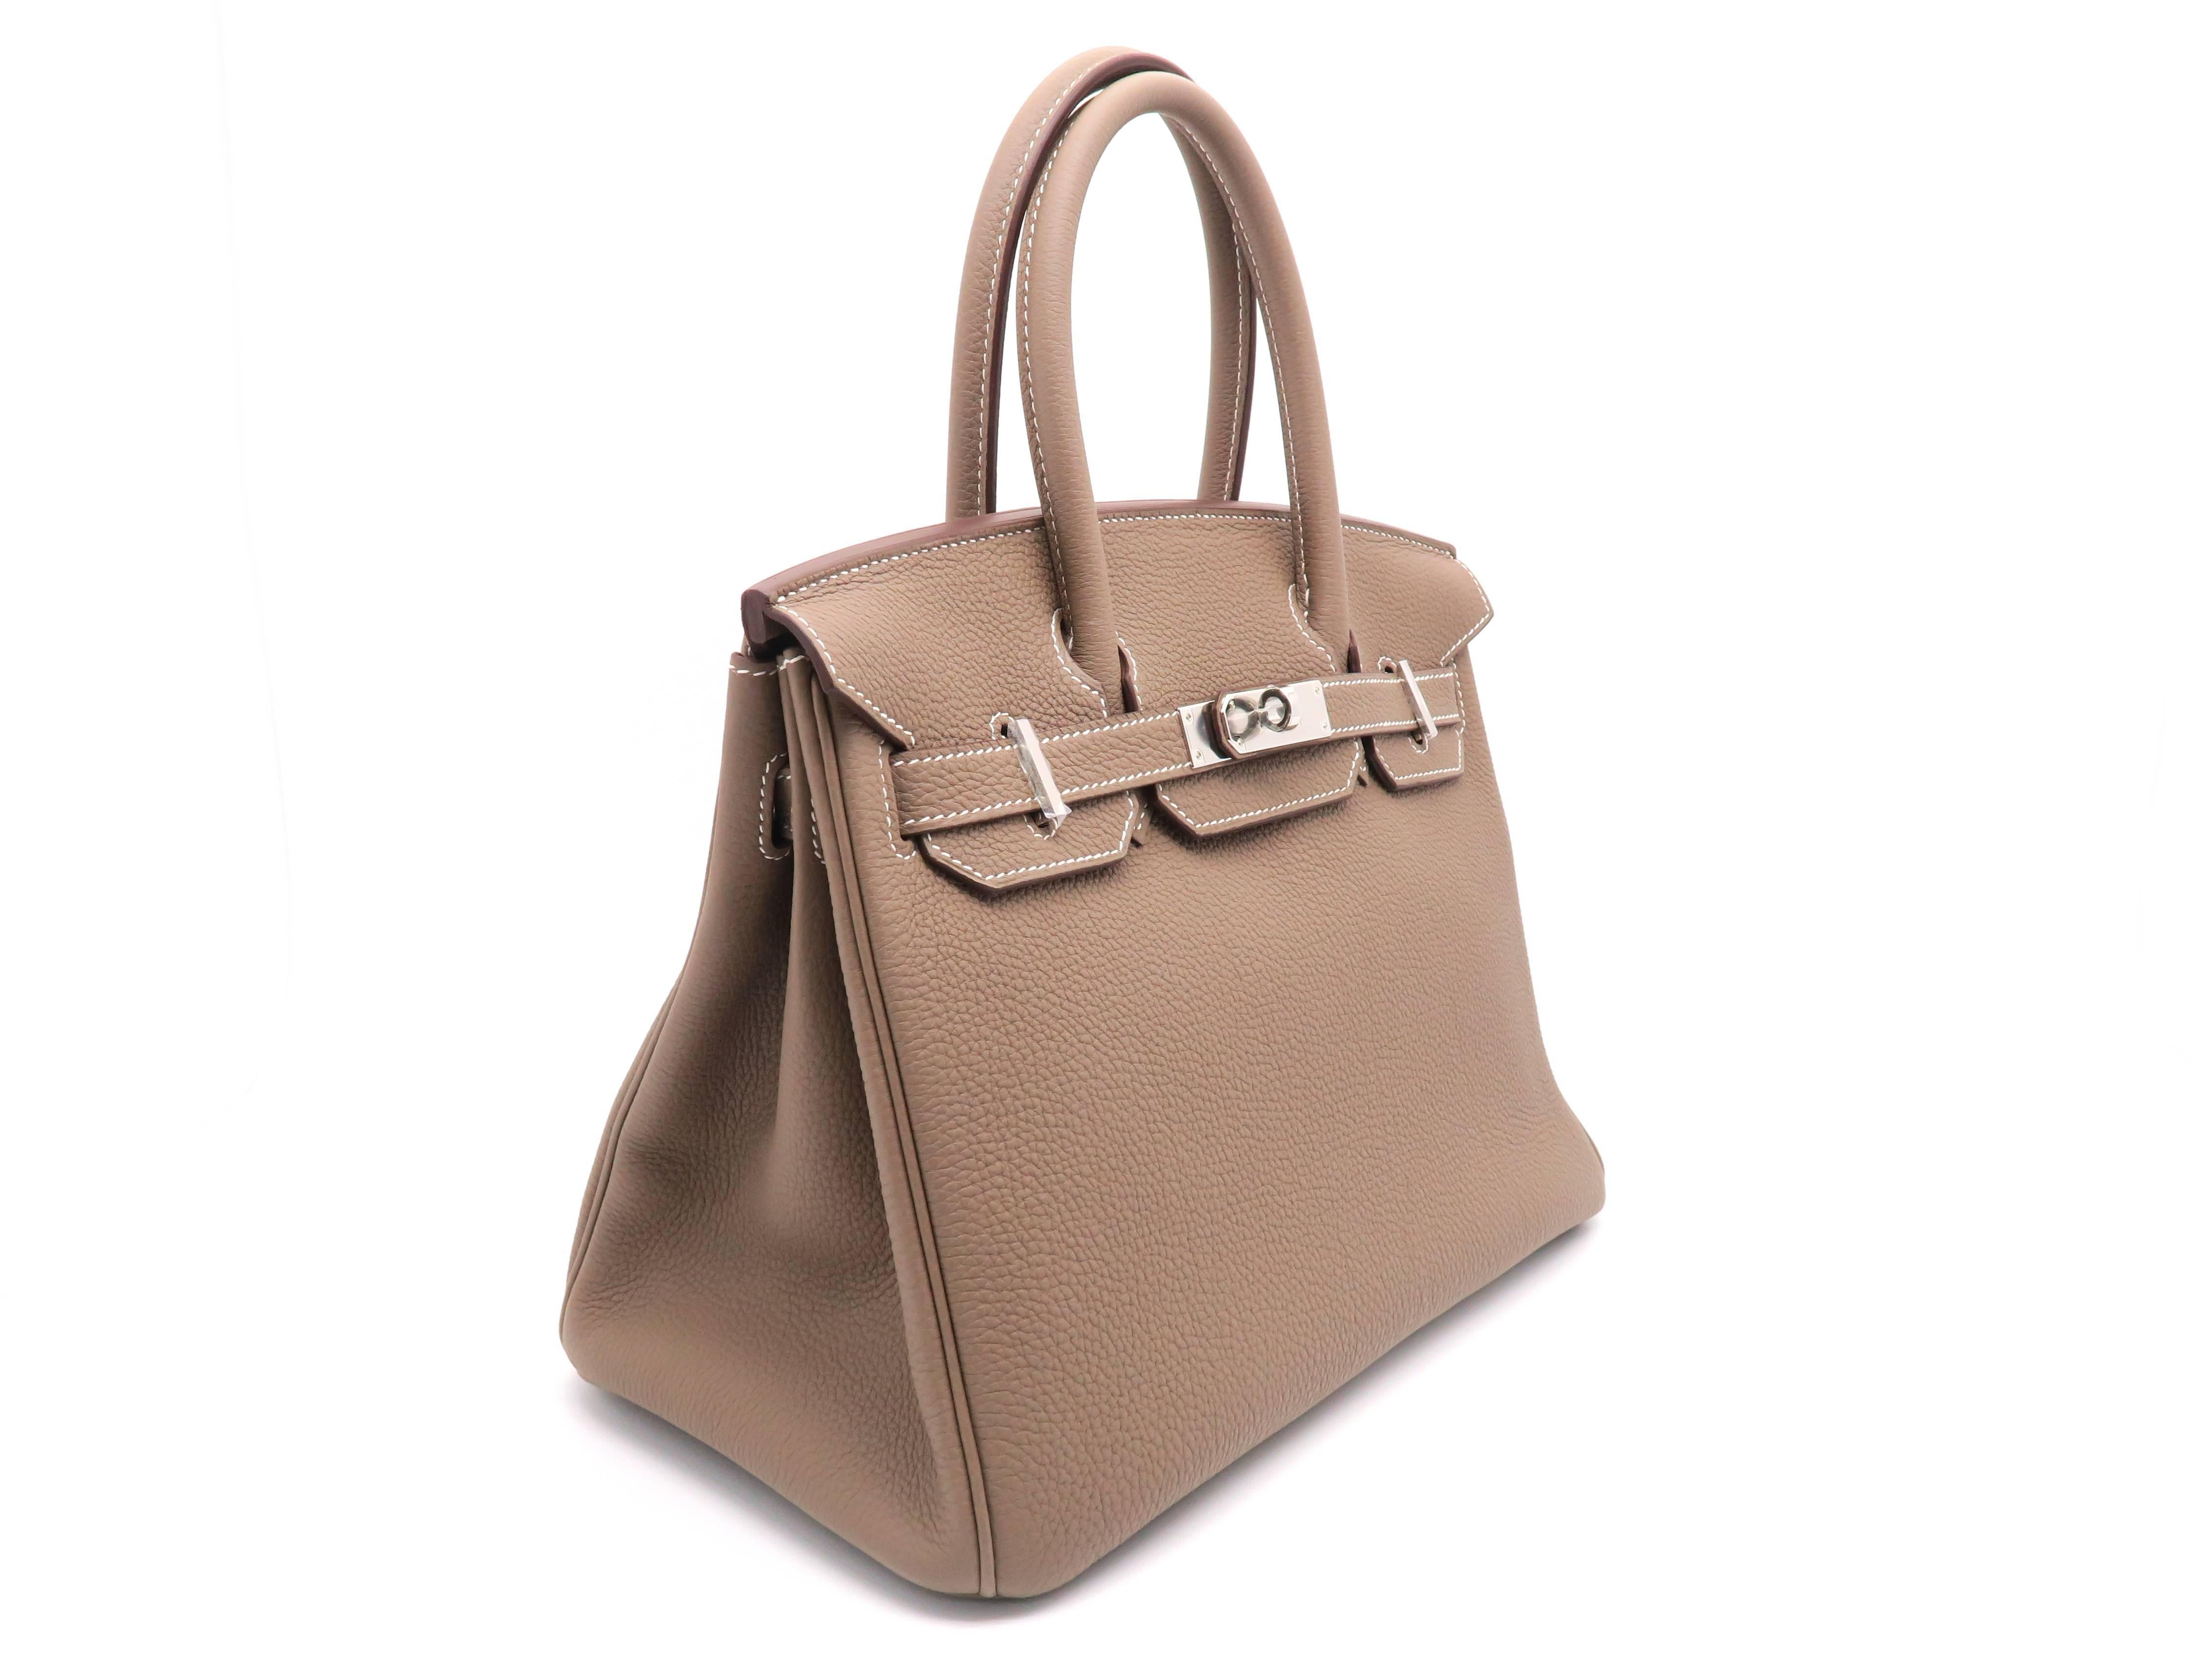 Color: Grey / Etoupe (Designer Color )
Material: Togo Leather

Condition: Rank N 
Overall: Brand New, Not Used
Surface: Good
Corners: Good 
Handles/Straps: Good
Hardware: Good

Dimension: W30 × H22 × D16cm（W11.8" × H8.6" ×